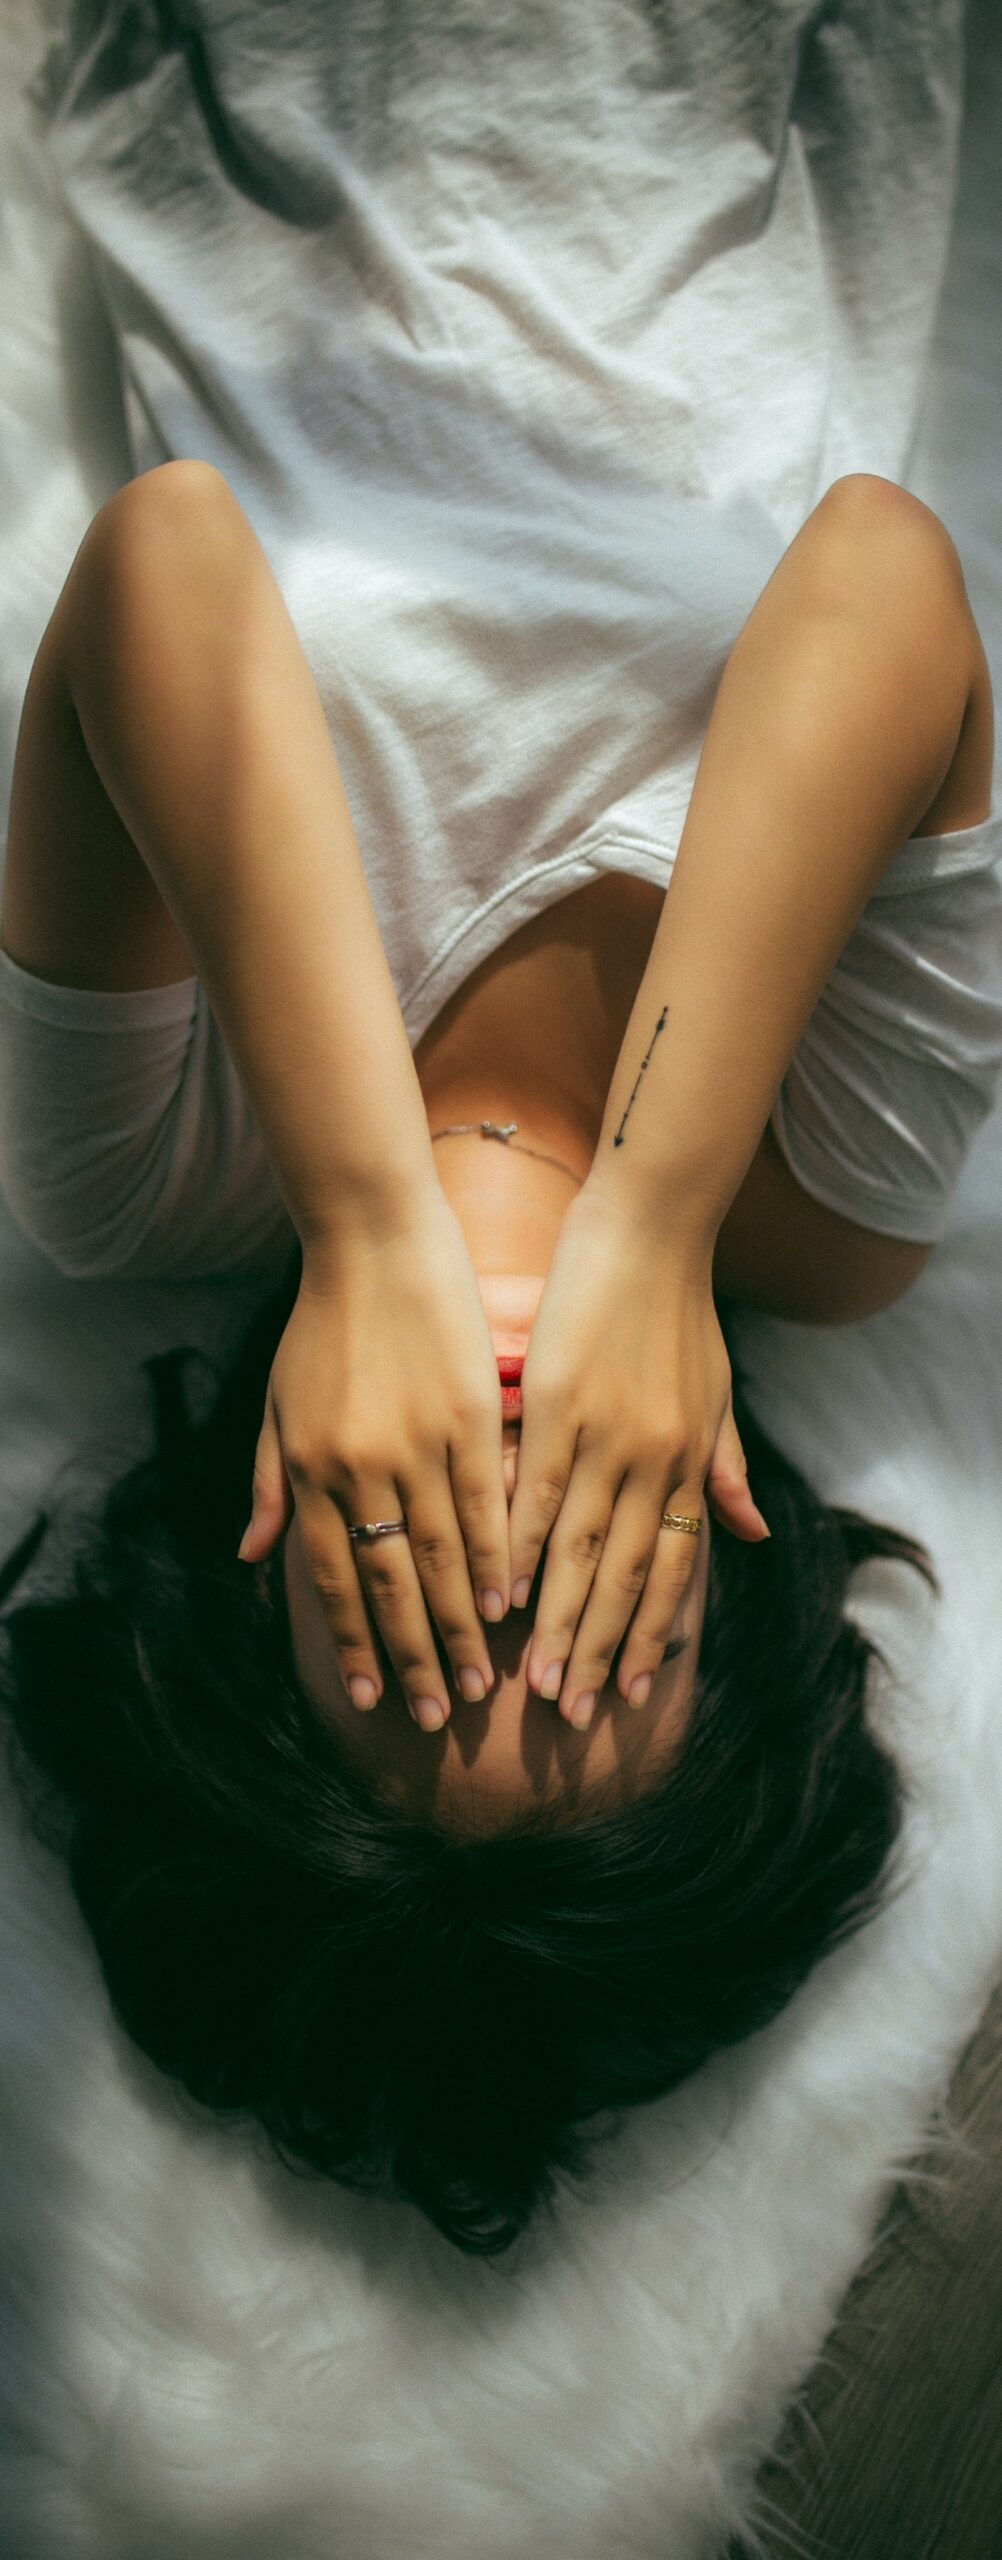 Image of woman covering her face in stress while laying in bed